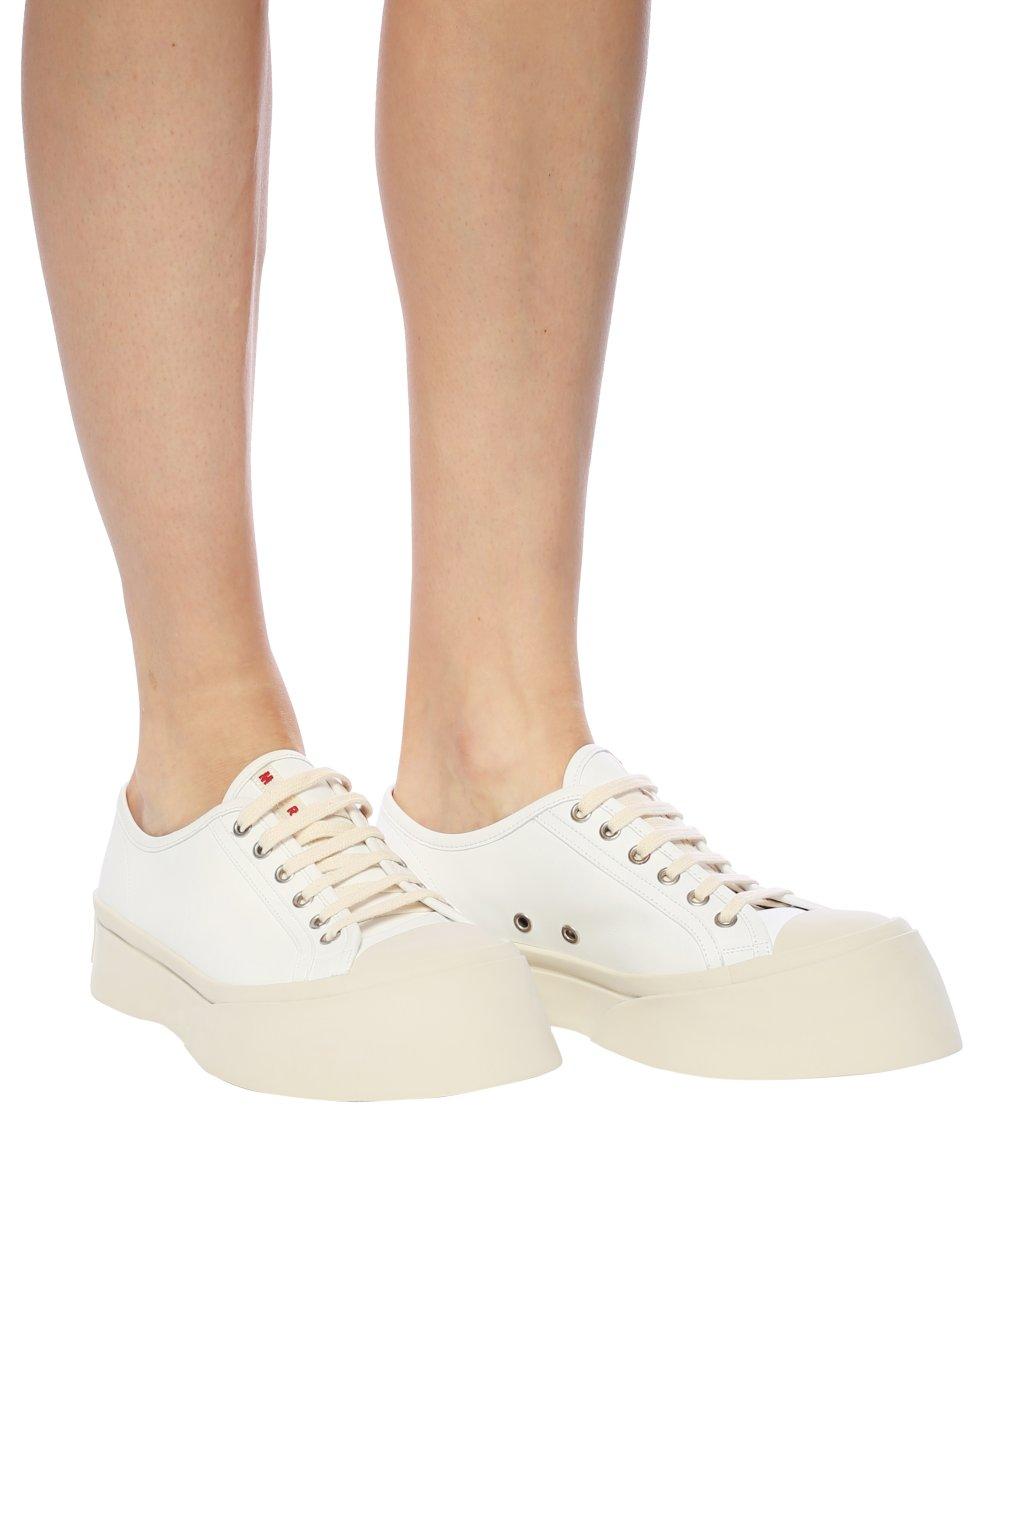 Marni Leather 'pablo' Platform Sneakers in White | Lyst